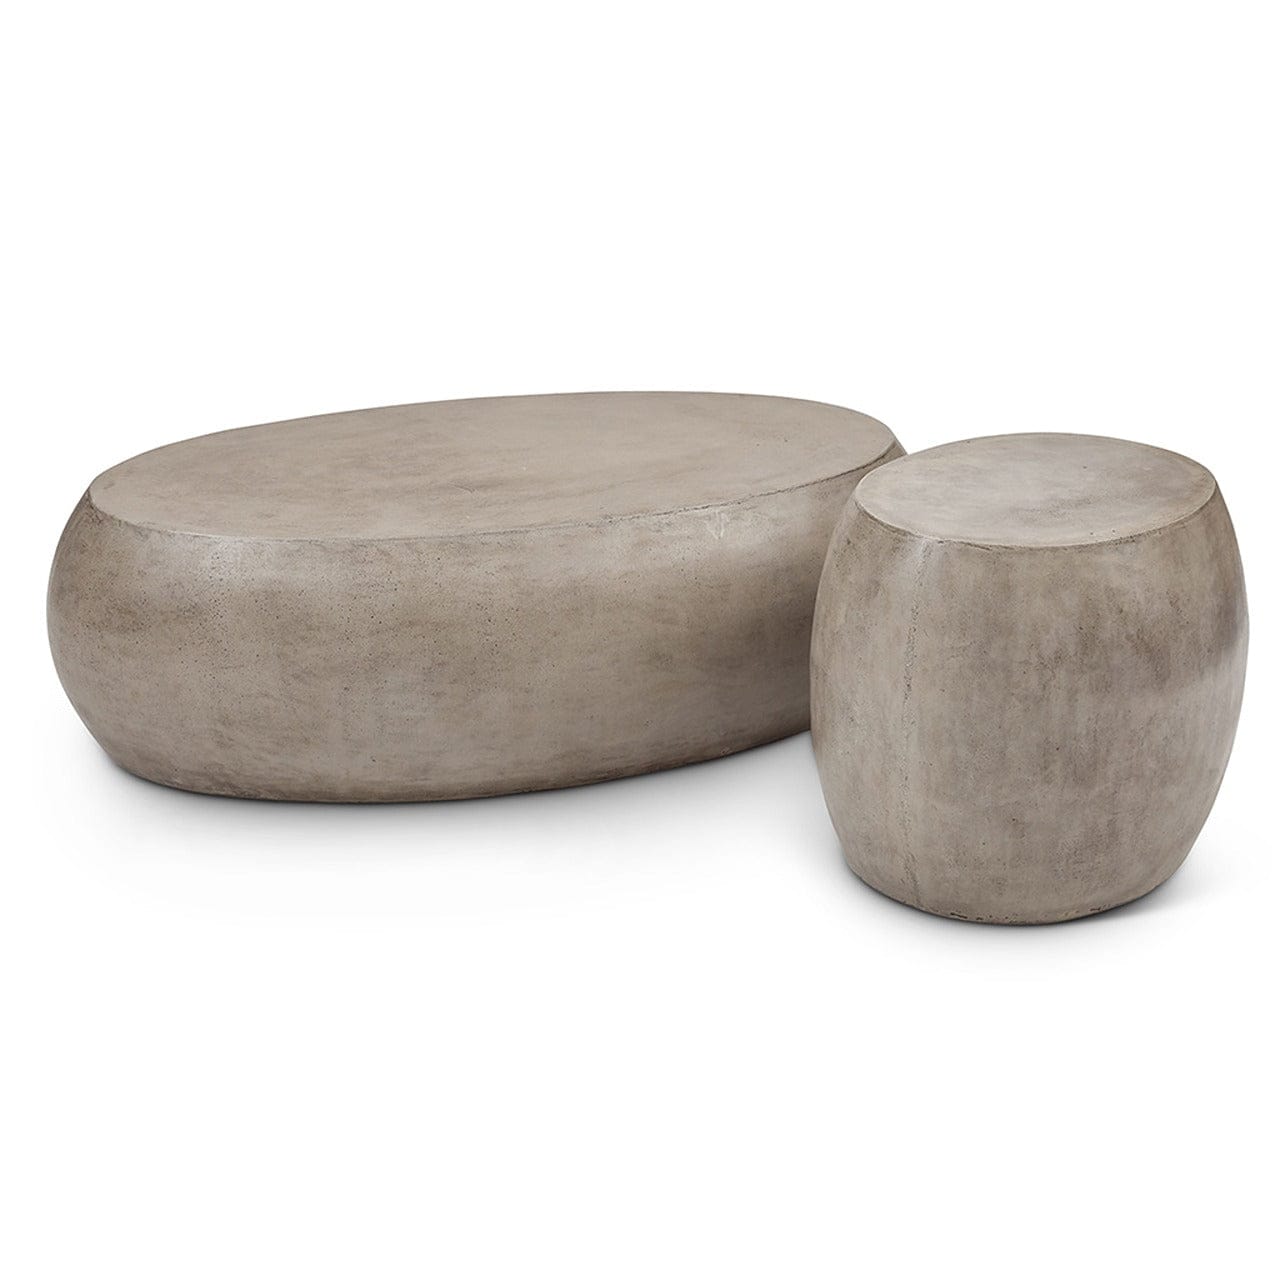 Pebble Outdoor Coffee Table